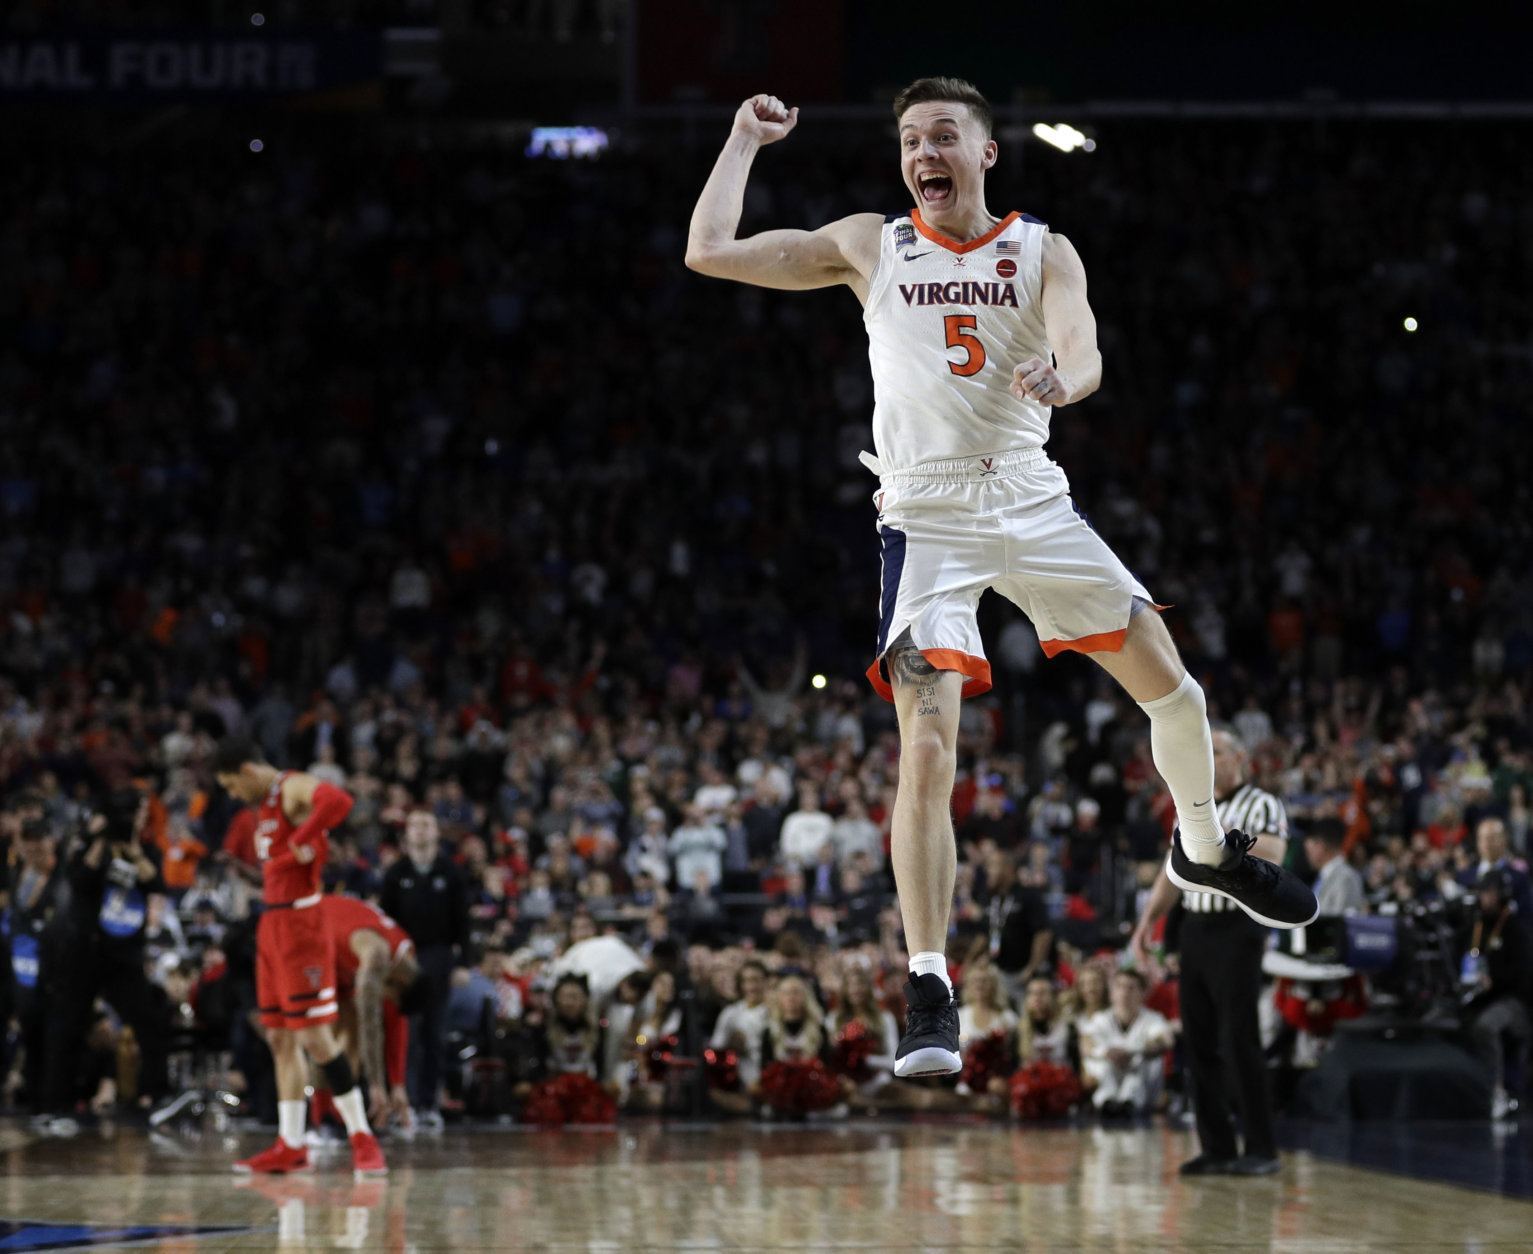 Virginia's Kyle Guy (5) celebrates after defeating Texas Tech 85-77 in the overtime in the championship of the Final Four NCAA college basketball tournament, Monday, April 8, 2019, in Minneapolis. (AP Photo/David J. Phillip)